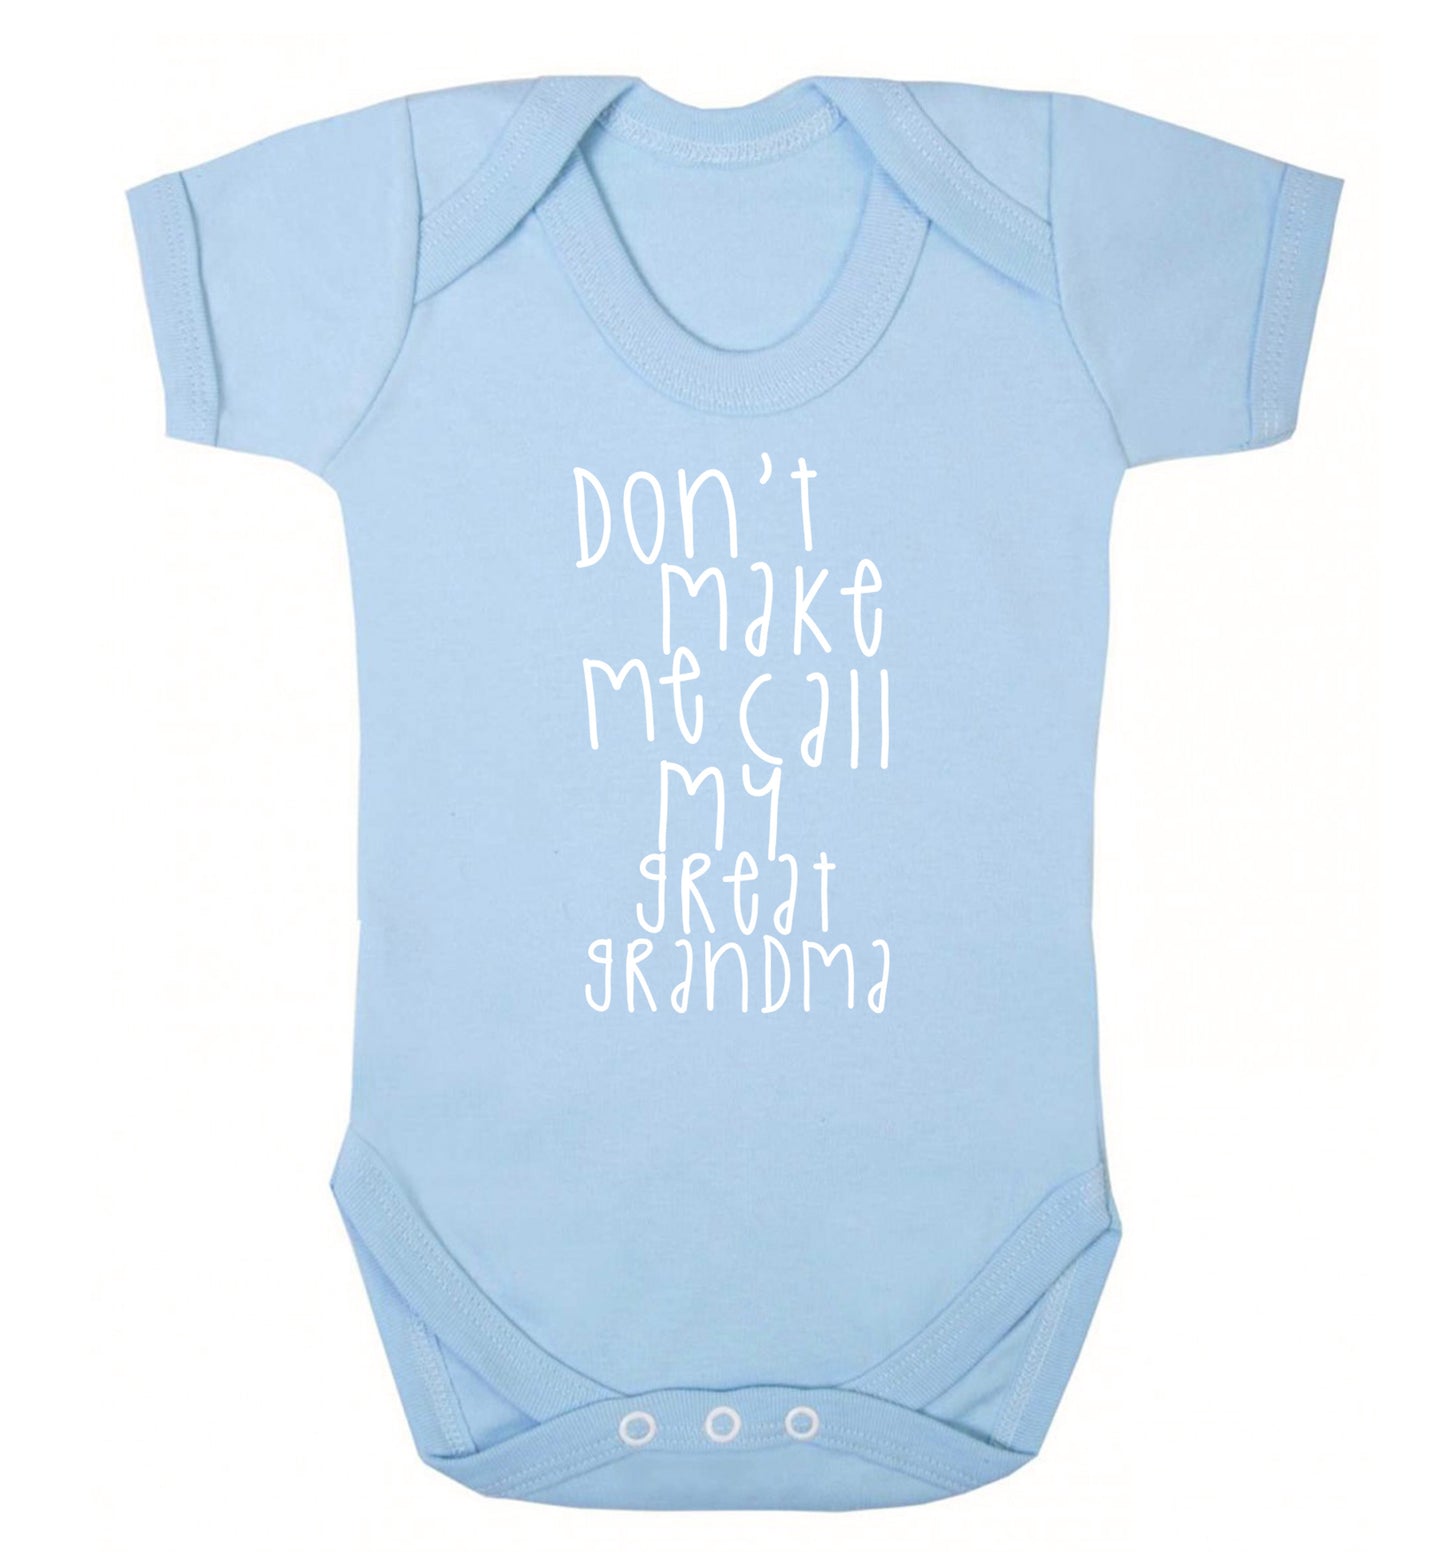 Don't make me call my great grandma Baby Vest pale blue 18-24 months